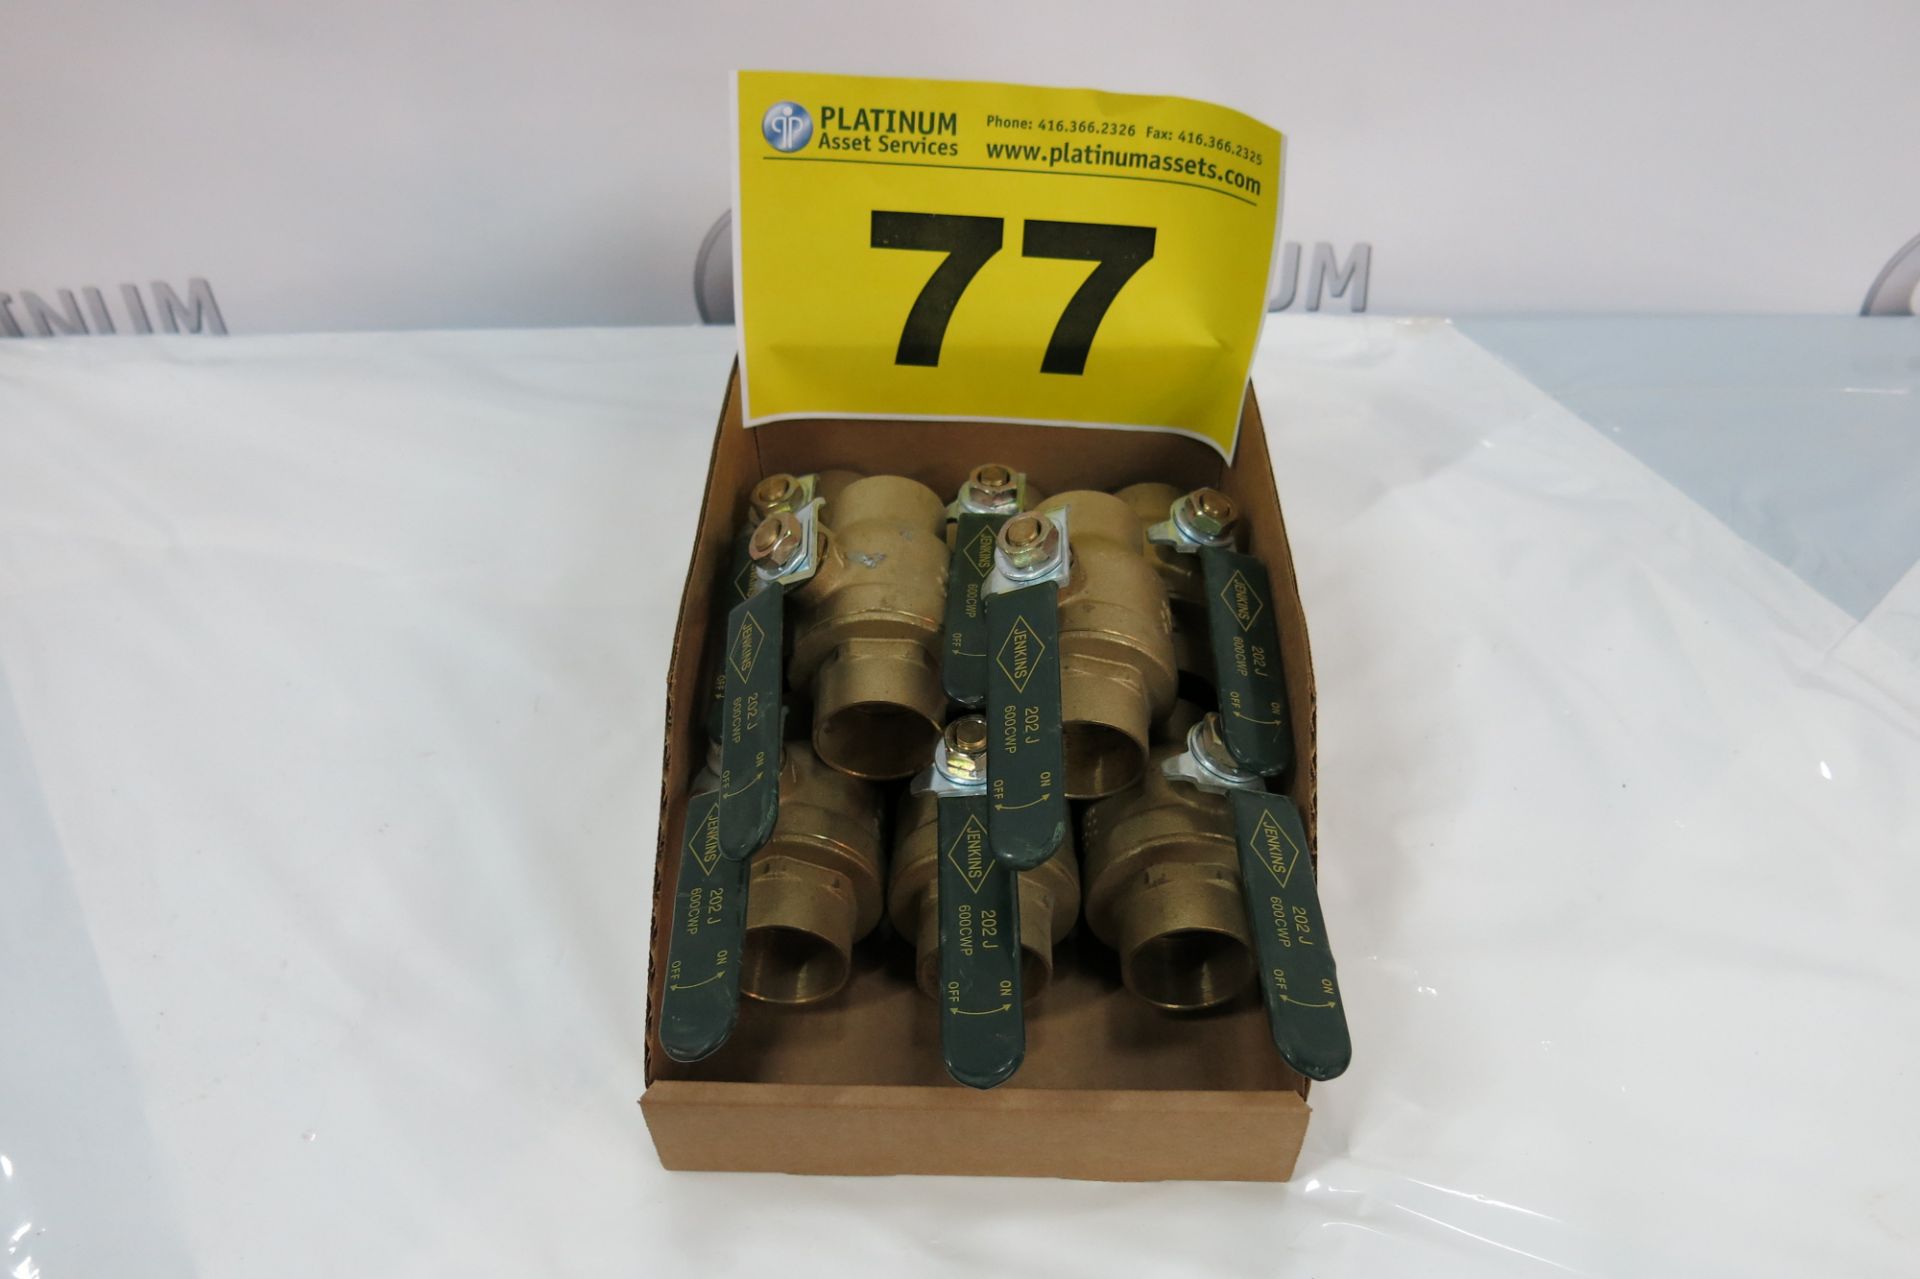 LOT OF JENKINS, 202J, 1 1/2", BALL VALVES - NEW (LOCATED IN SCARBOROUGH)